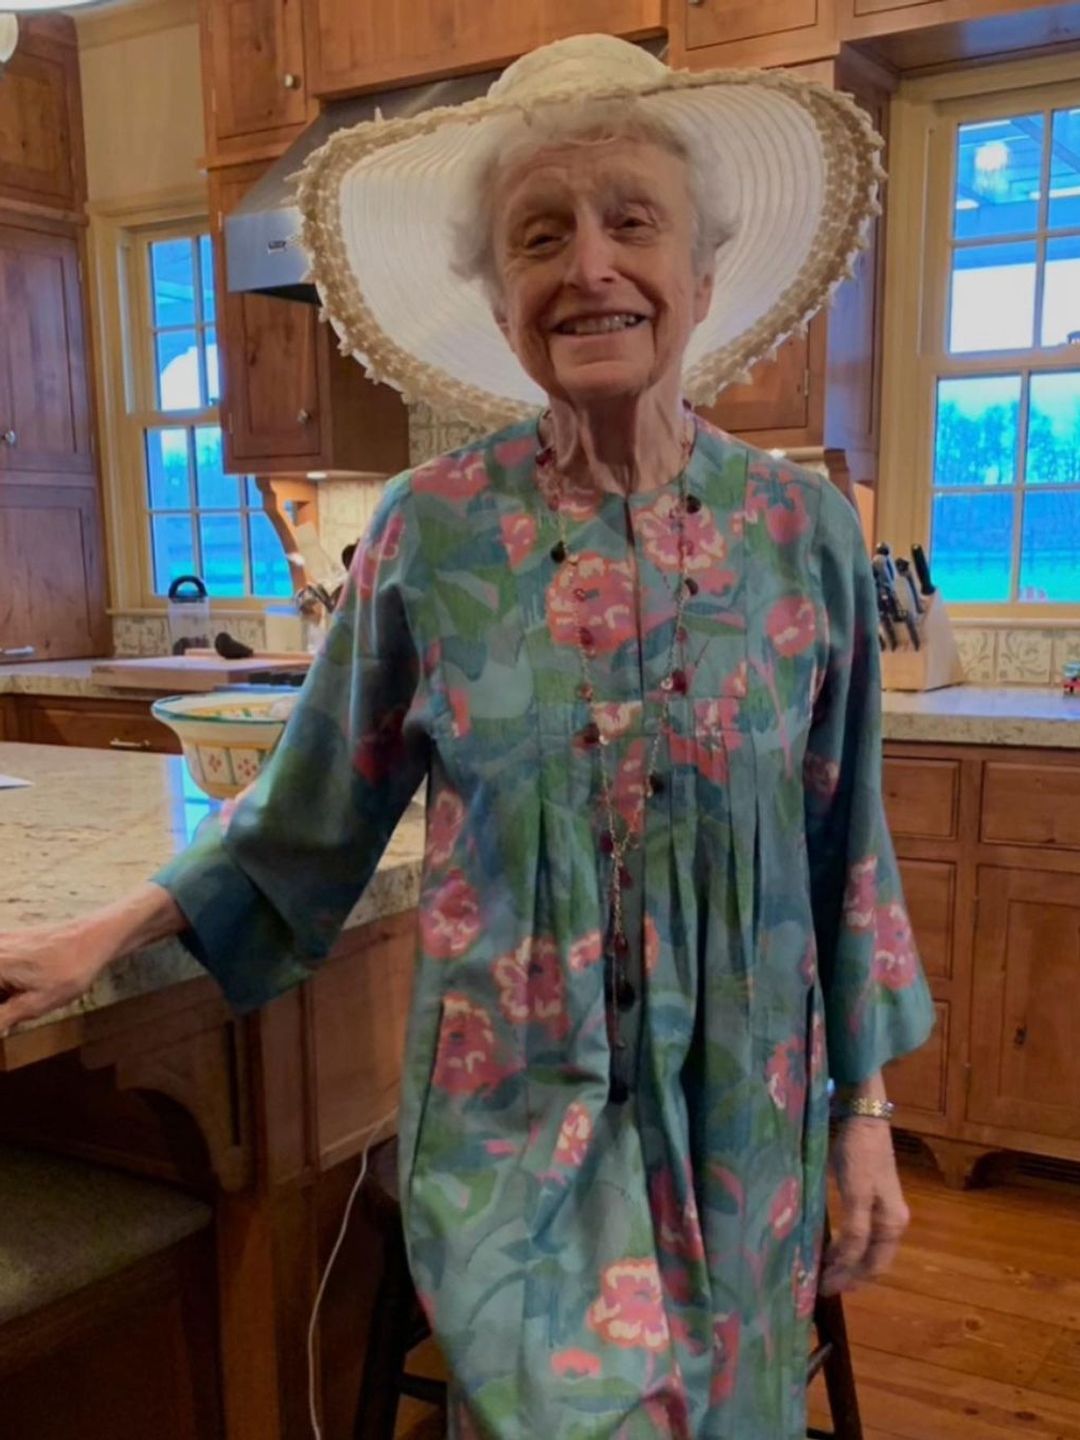 Kyra's mom Patricia smiling in a sunhat and sundress in their kitchen